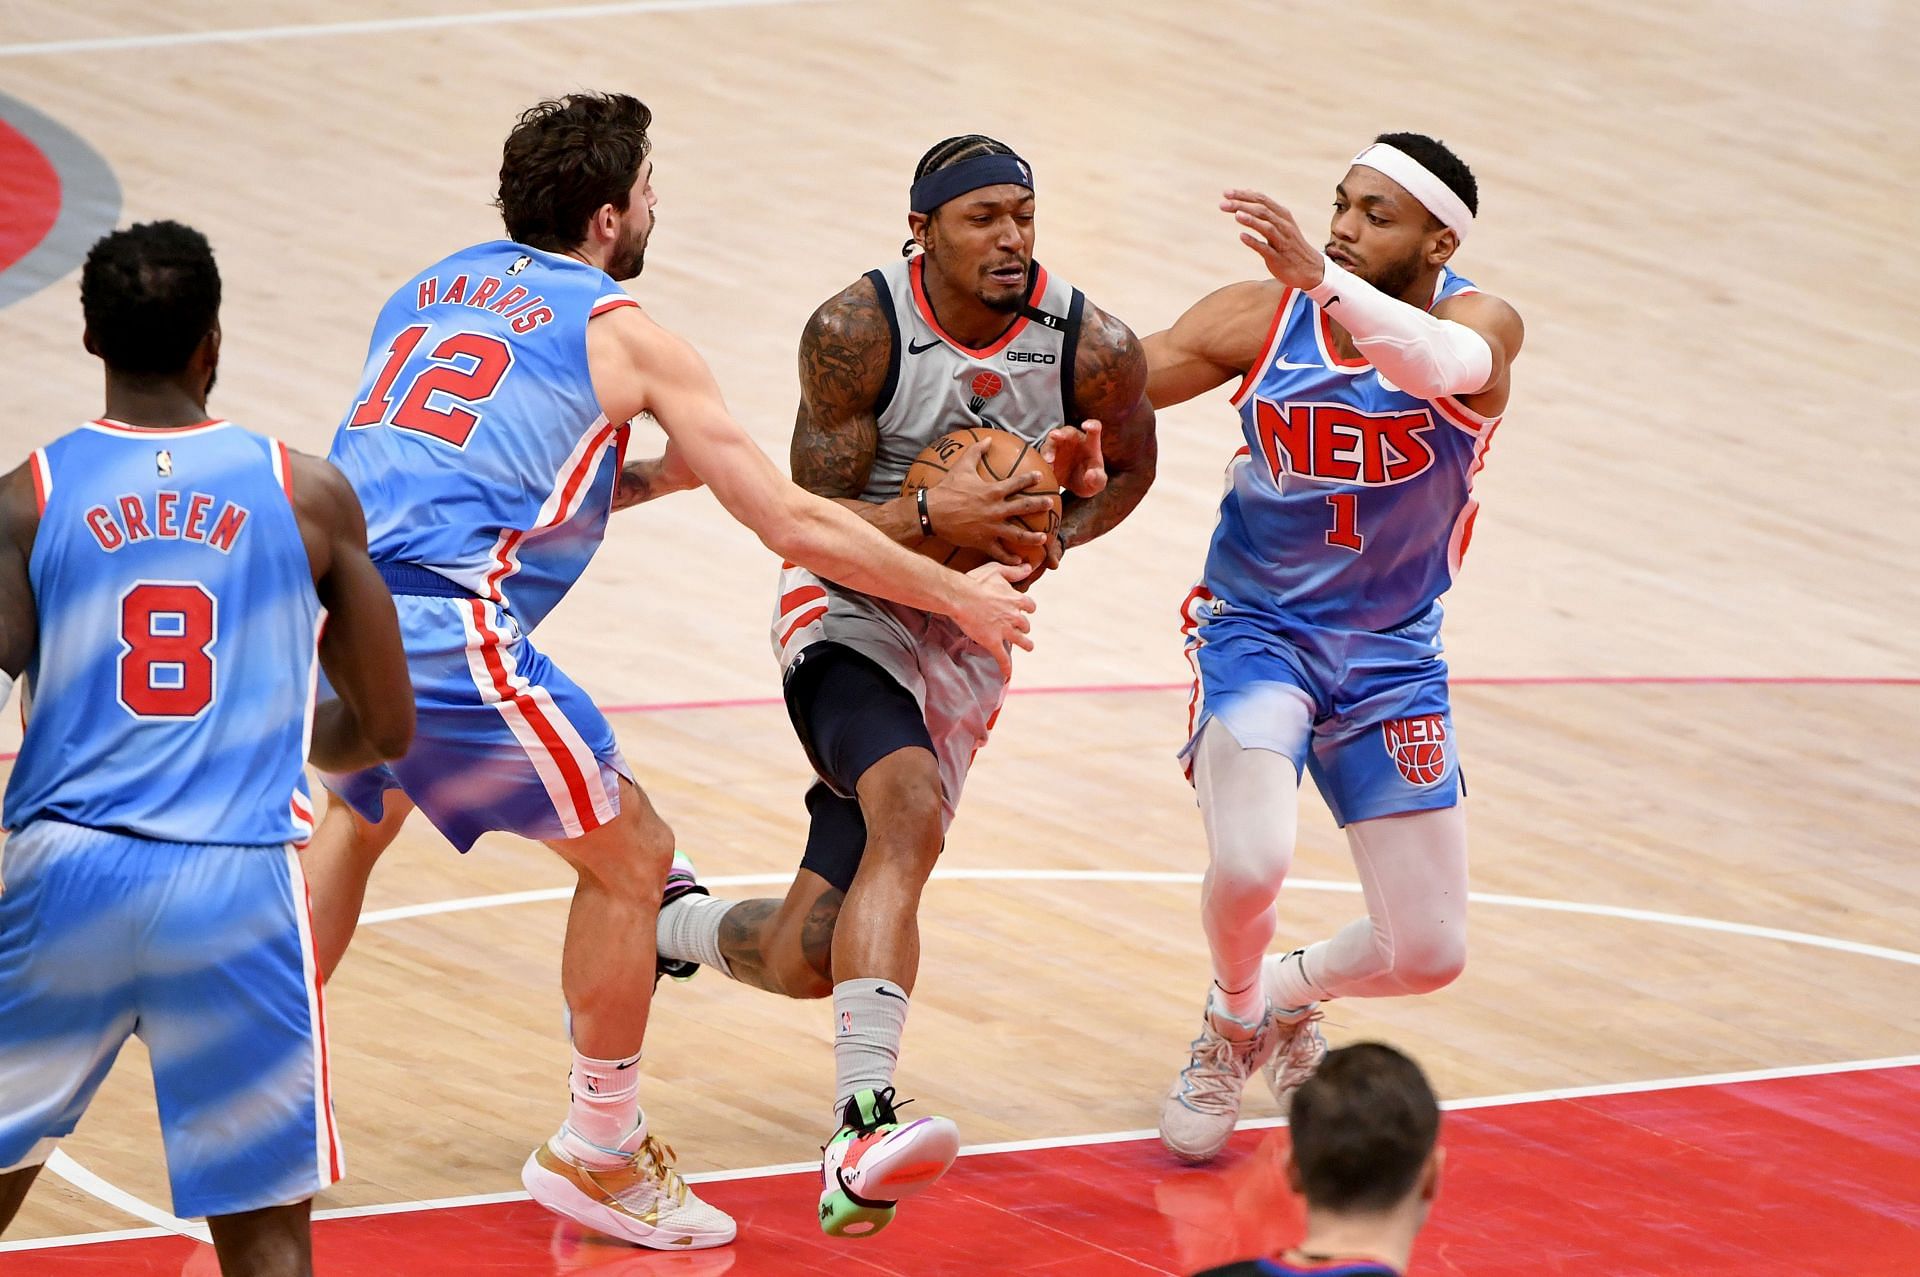 Bradley Beal #3 of the Washington Wizards dribbles against Joe Harris #12 and Bruce Brown #1 of the Brooklyn Nets